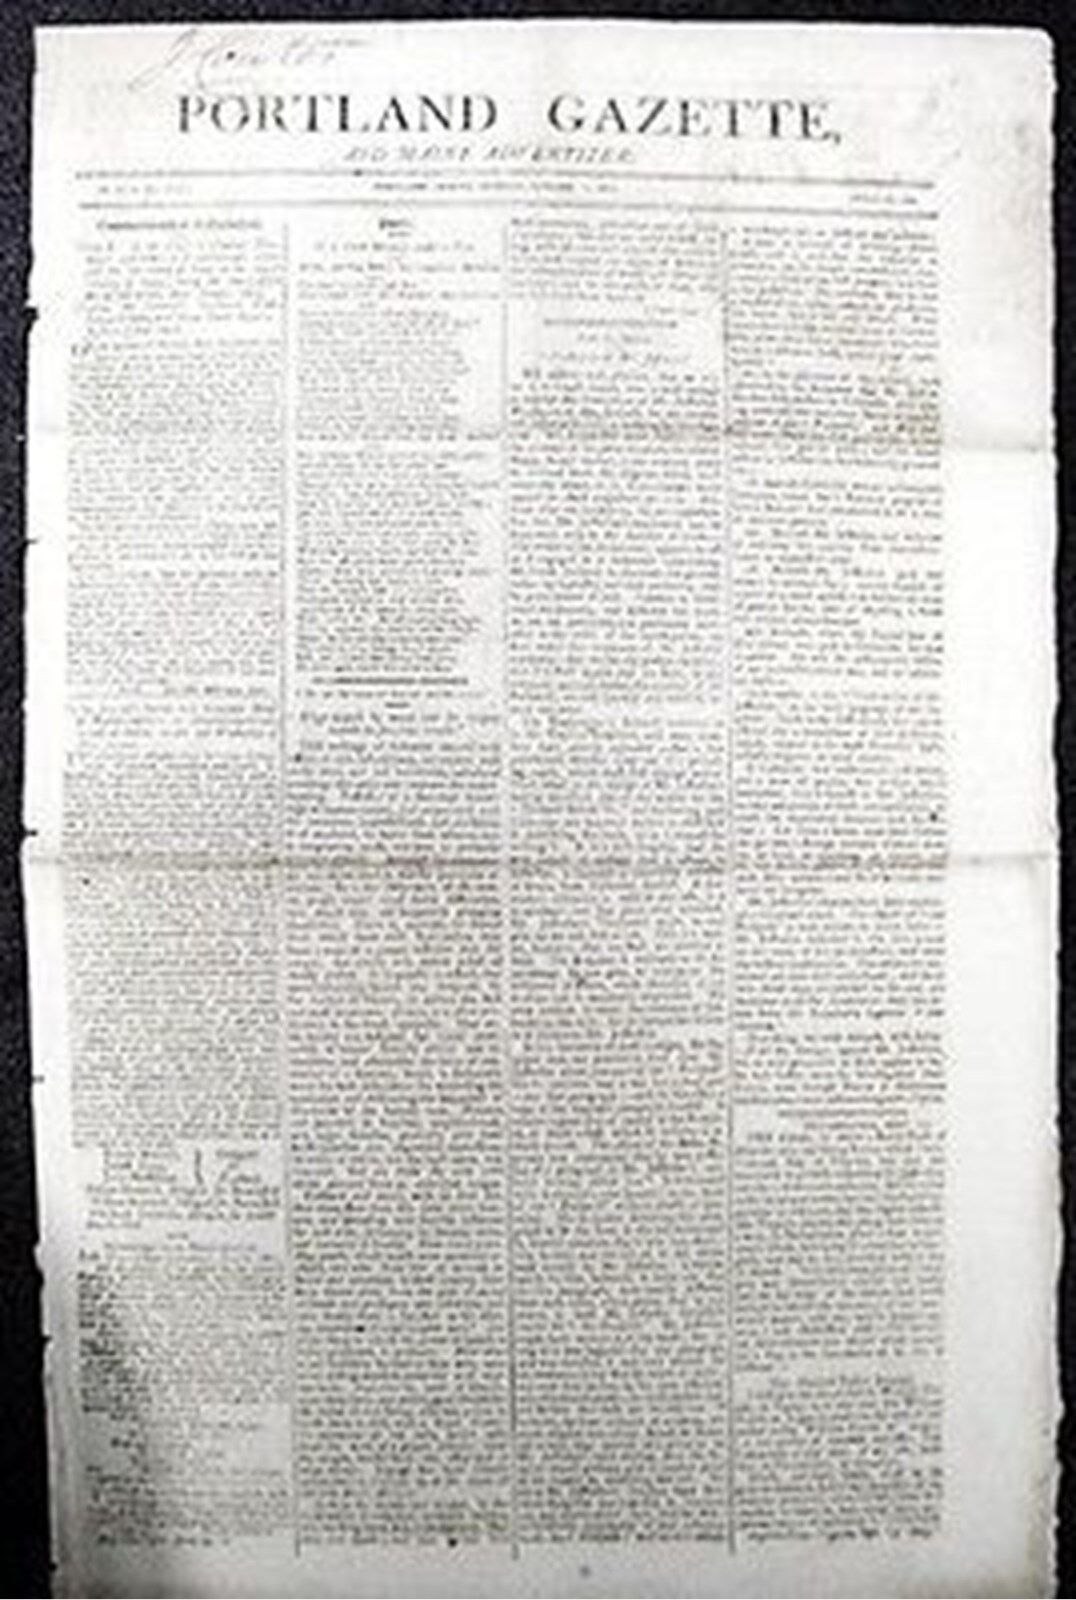 1805 PORTLAND GAZETTE NEWSPAPER END OF WAR WITH BARBARY PIRATES